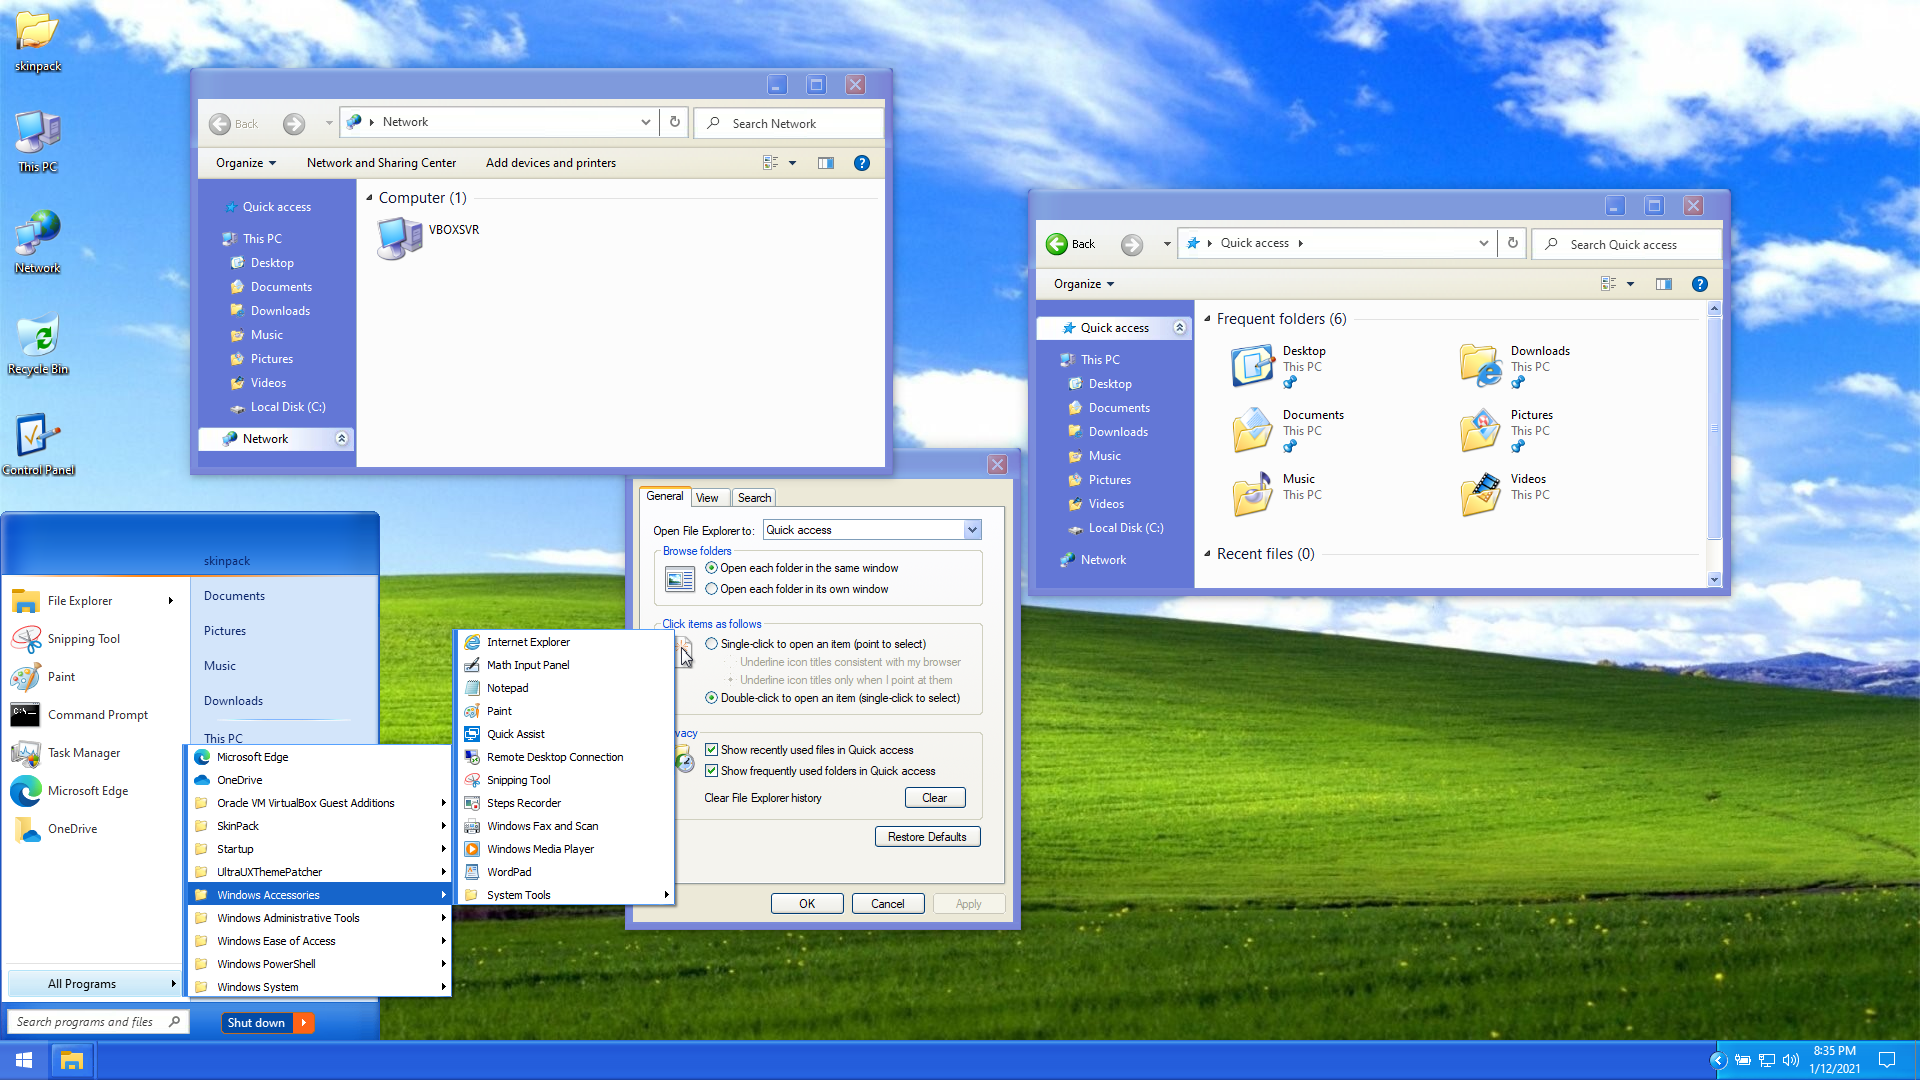 Windows XP SkinPack for Windows 10 and 7/8